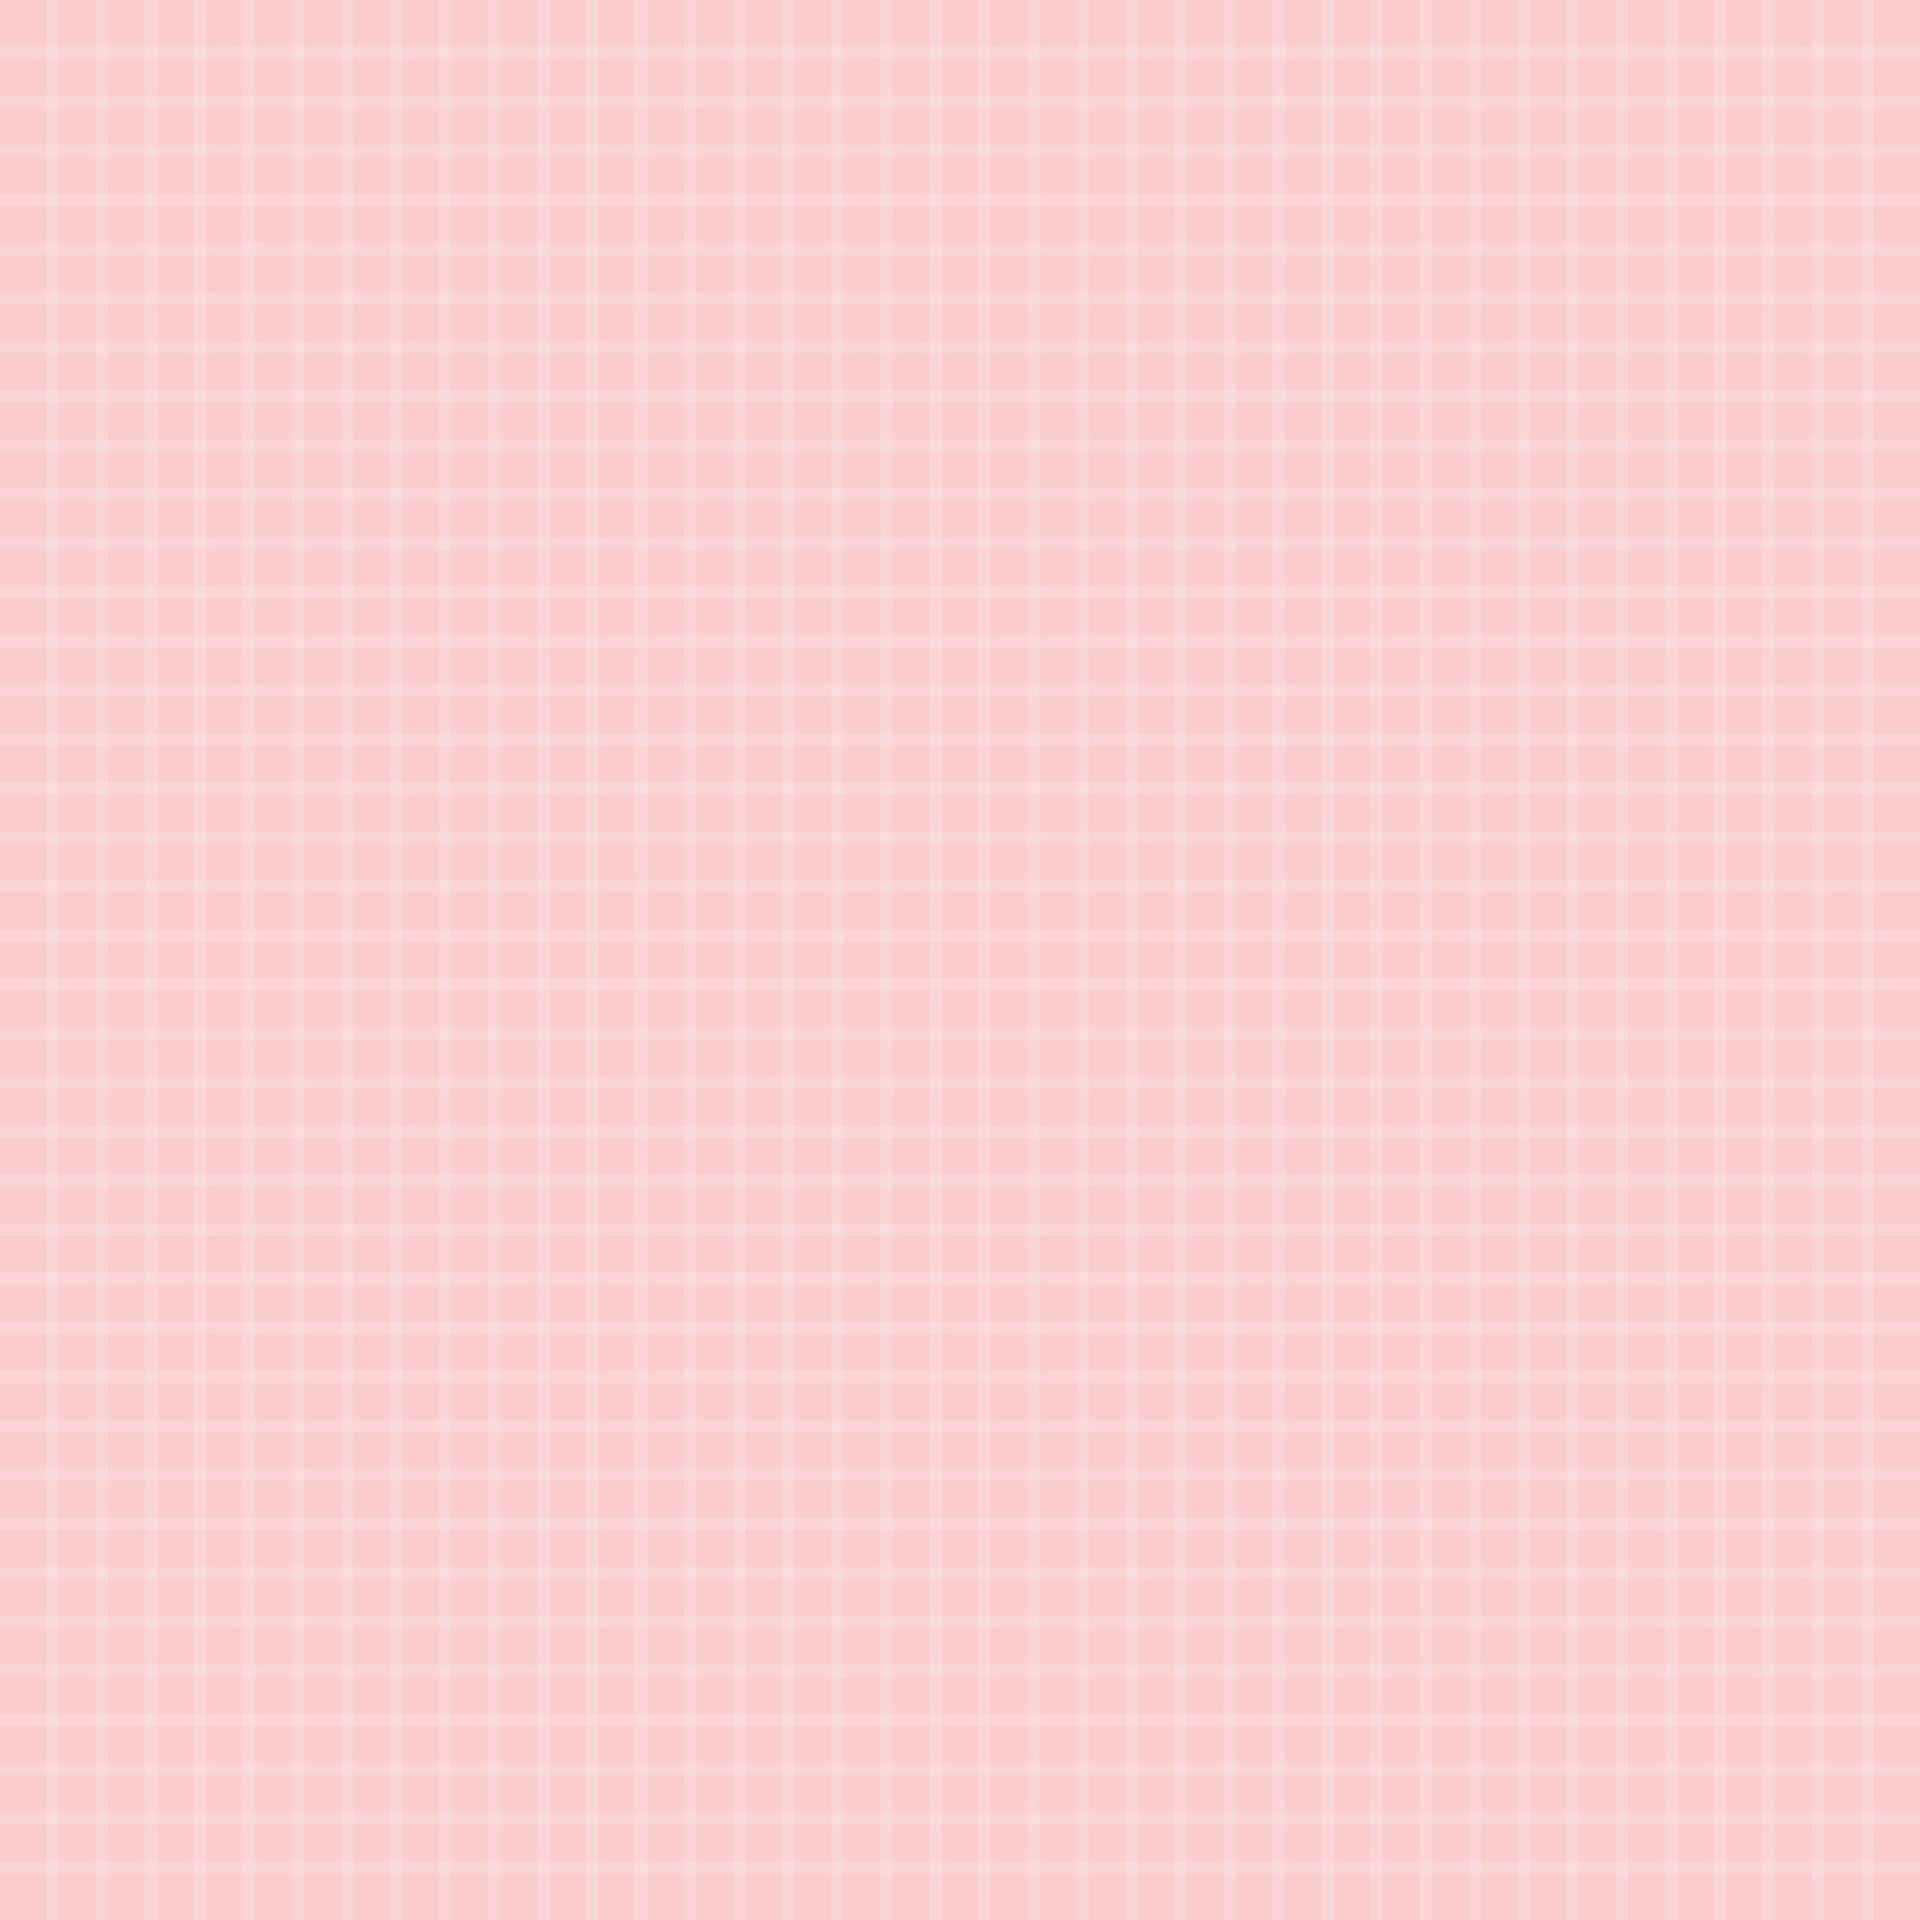 A pink background with a grid pattern - Soft pink, light pink